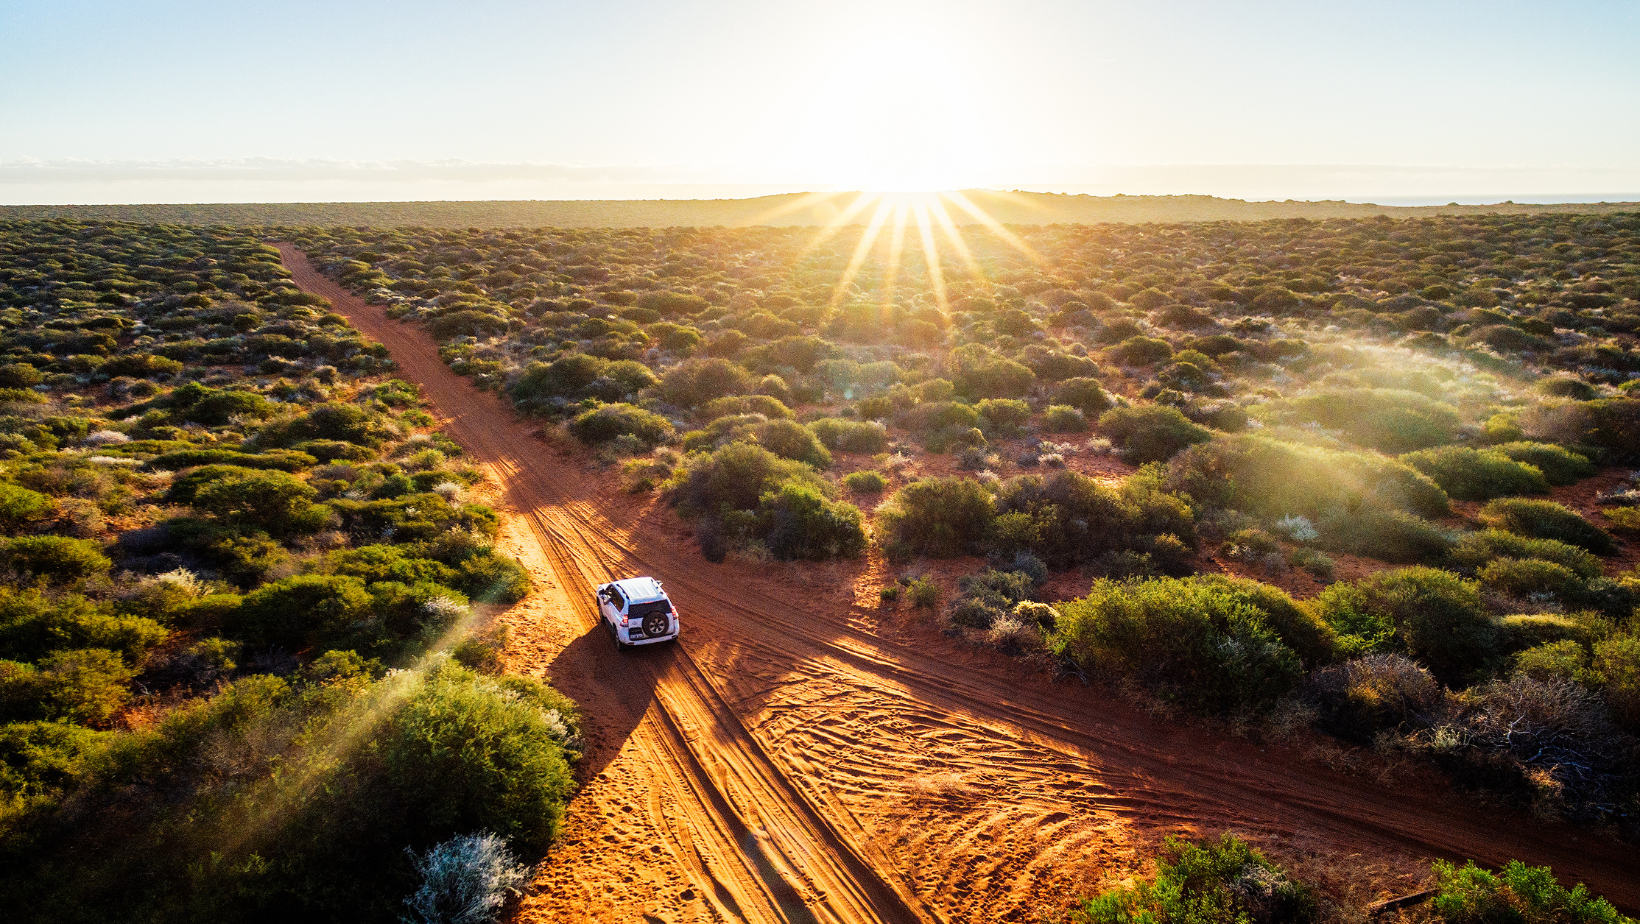 Off road vehicle in outback Australia